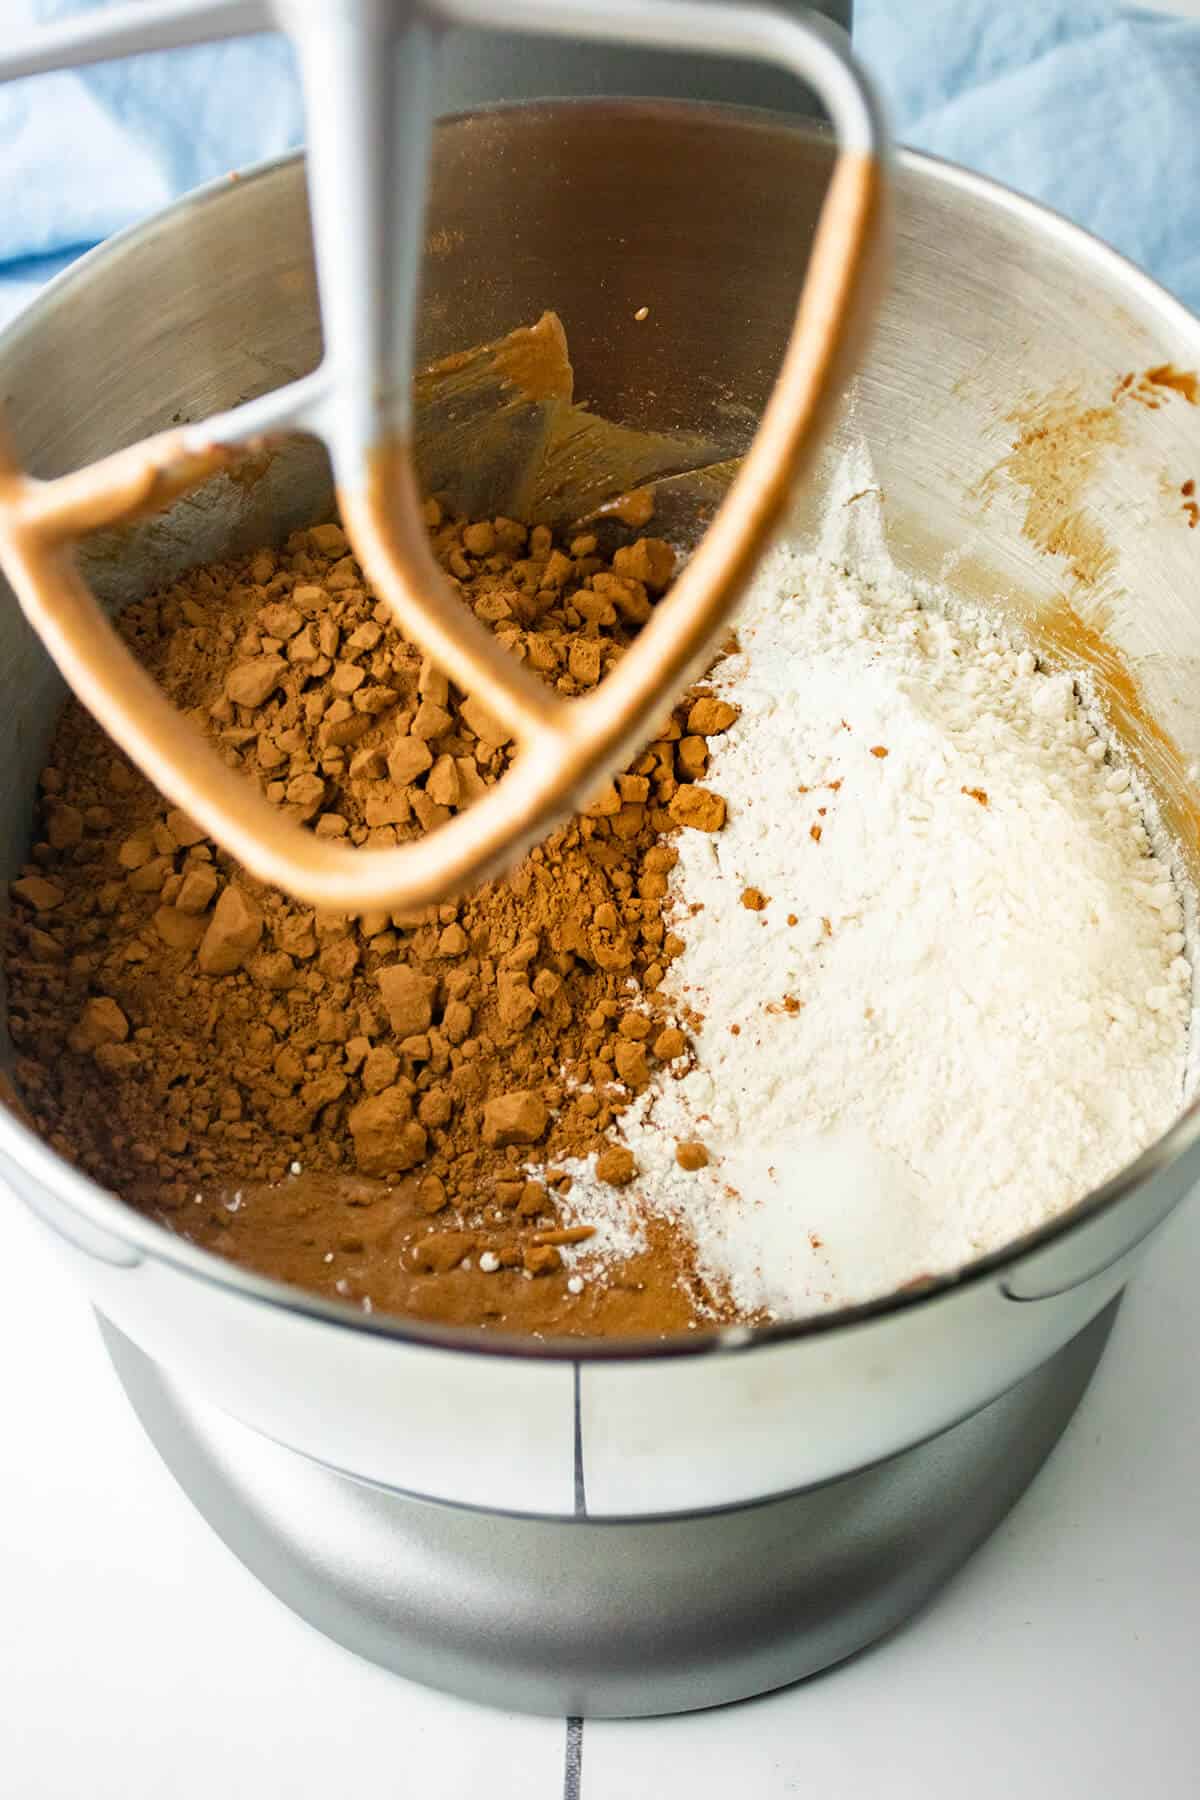 Cocoa powder and flour added to chocolate mixture.